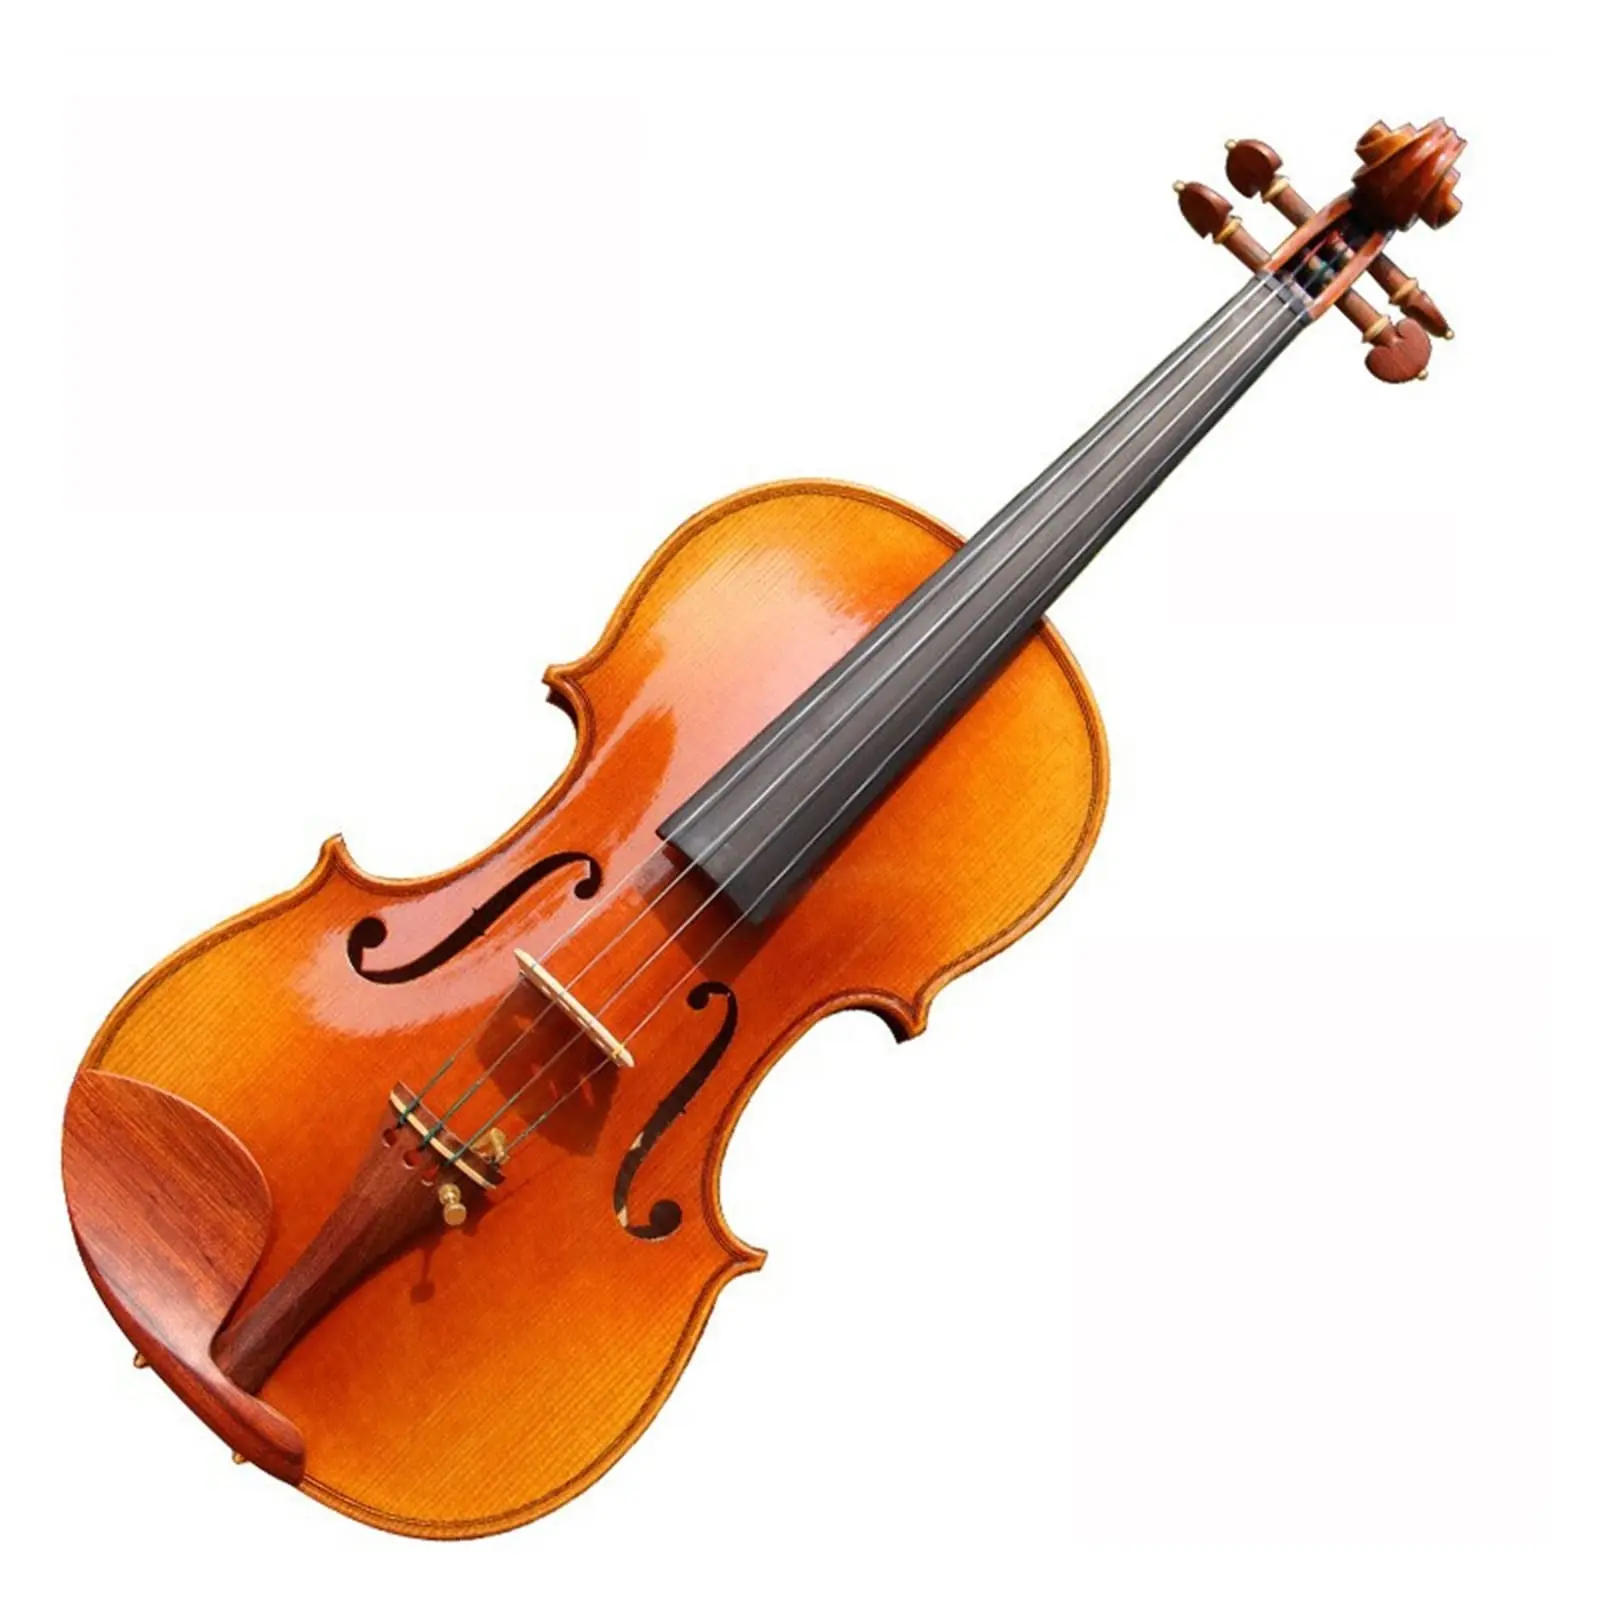 maple violines de - What kind of maple is used for violins